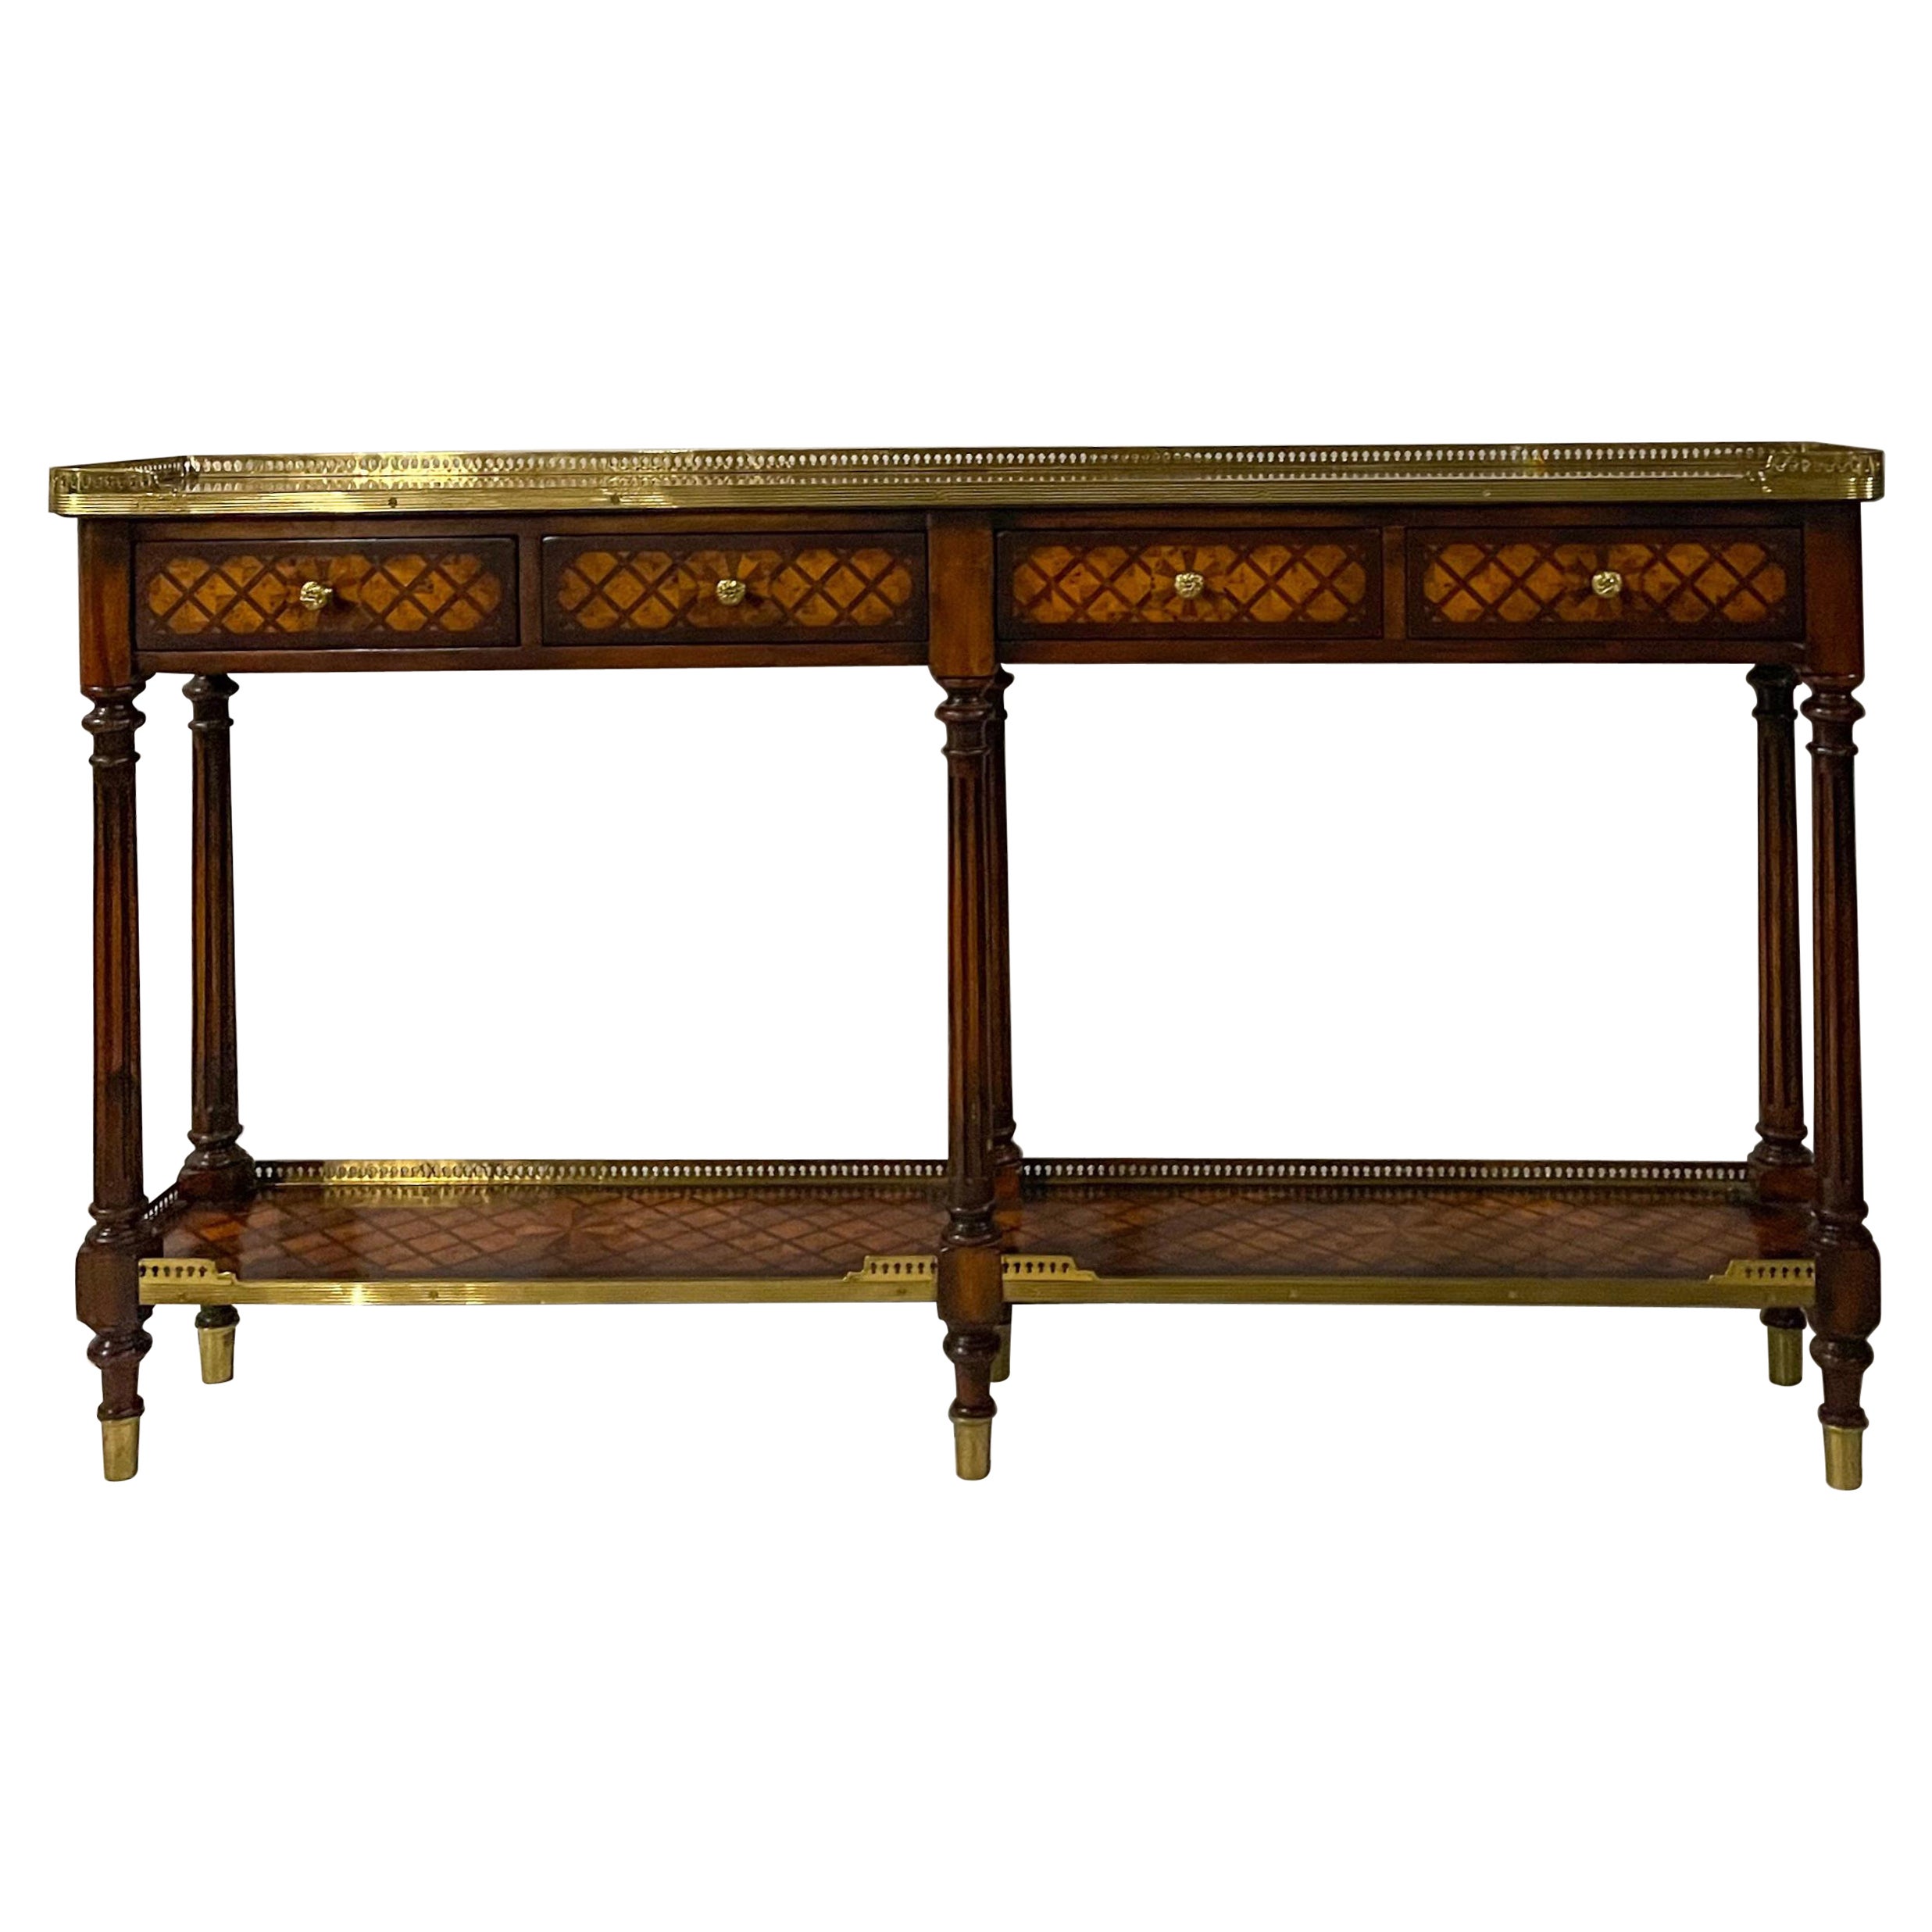 Regency Style Brass and Mahogany Inlaid Console Table Att. to Theodore Alexander